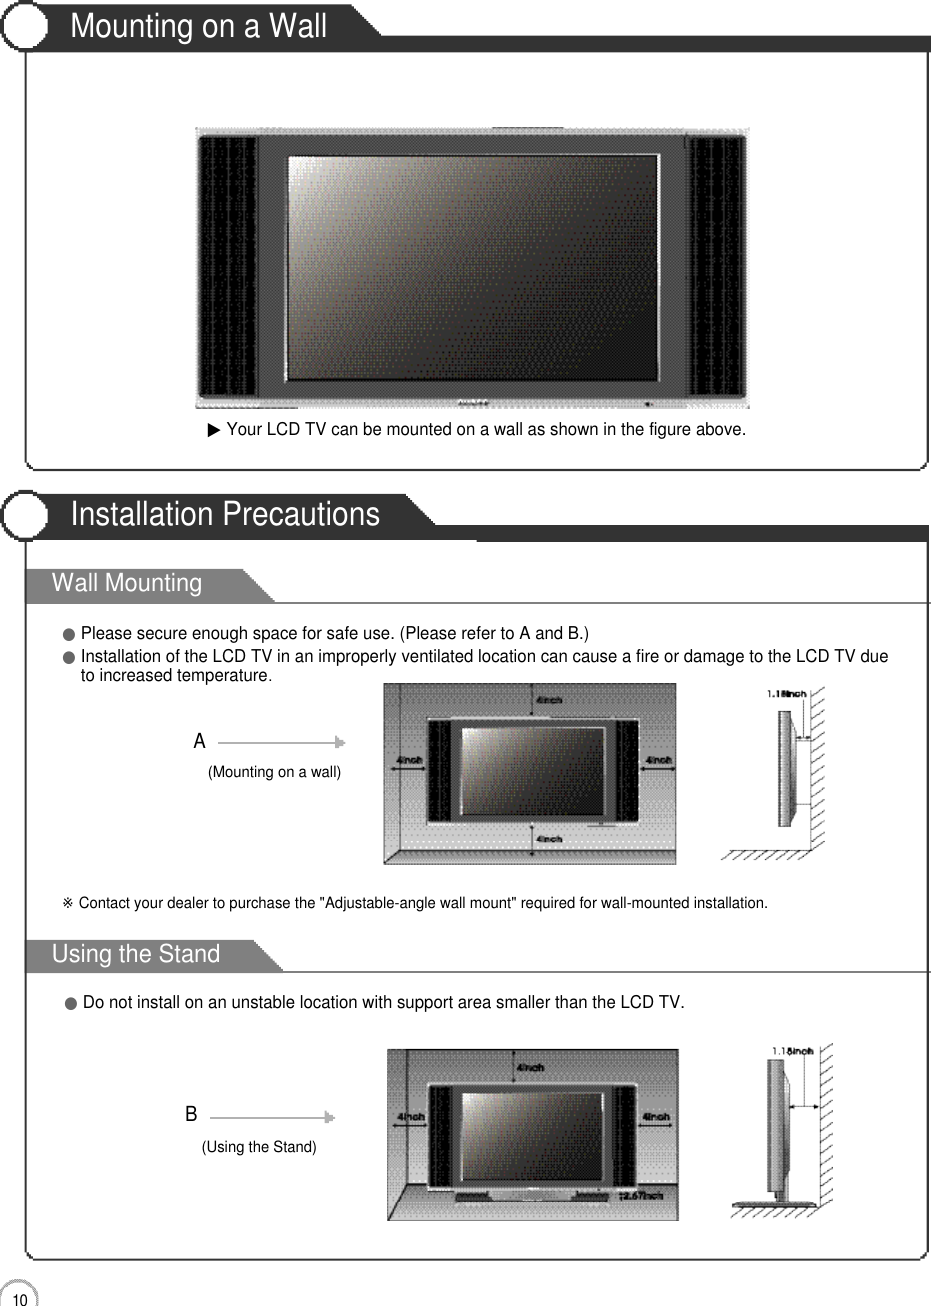 Wall MountingUsing the StandMounting on a WallInstallation Precautions1 0User Guidance Information▶Your LCD TV can be mounted on a wall as shown in the figure above.●Please secure enough space for safe use. (Please refer to A and B.)●Installation of the LCD TV in an improperly ventilated location can cause a fire or damage to the LCD TV dueto increased temperature.(Using the Stand)B(Mounting on a wall)A●Do not install on an unstable location with support area smaller than the LCD TV.※Contact your dealer to purchase the &quot;Adjustable-angle wall mount&quot; required for wall-mounted installation.